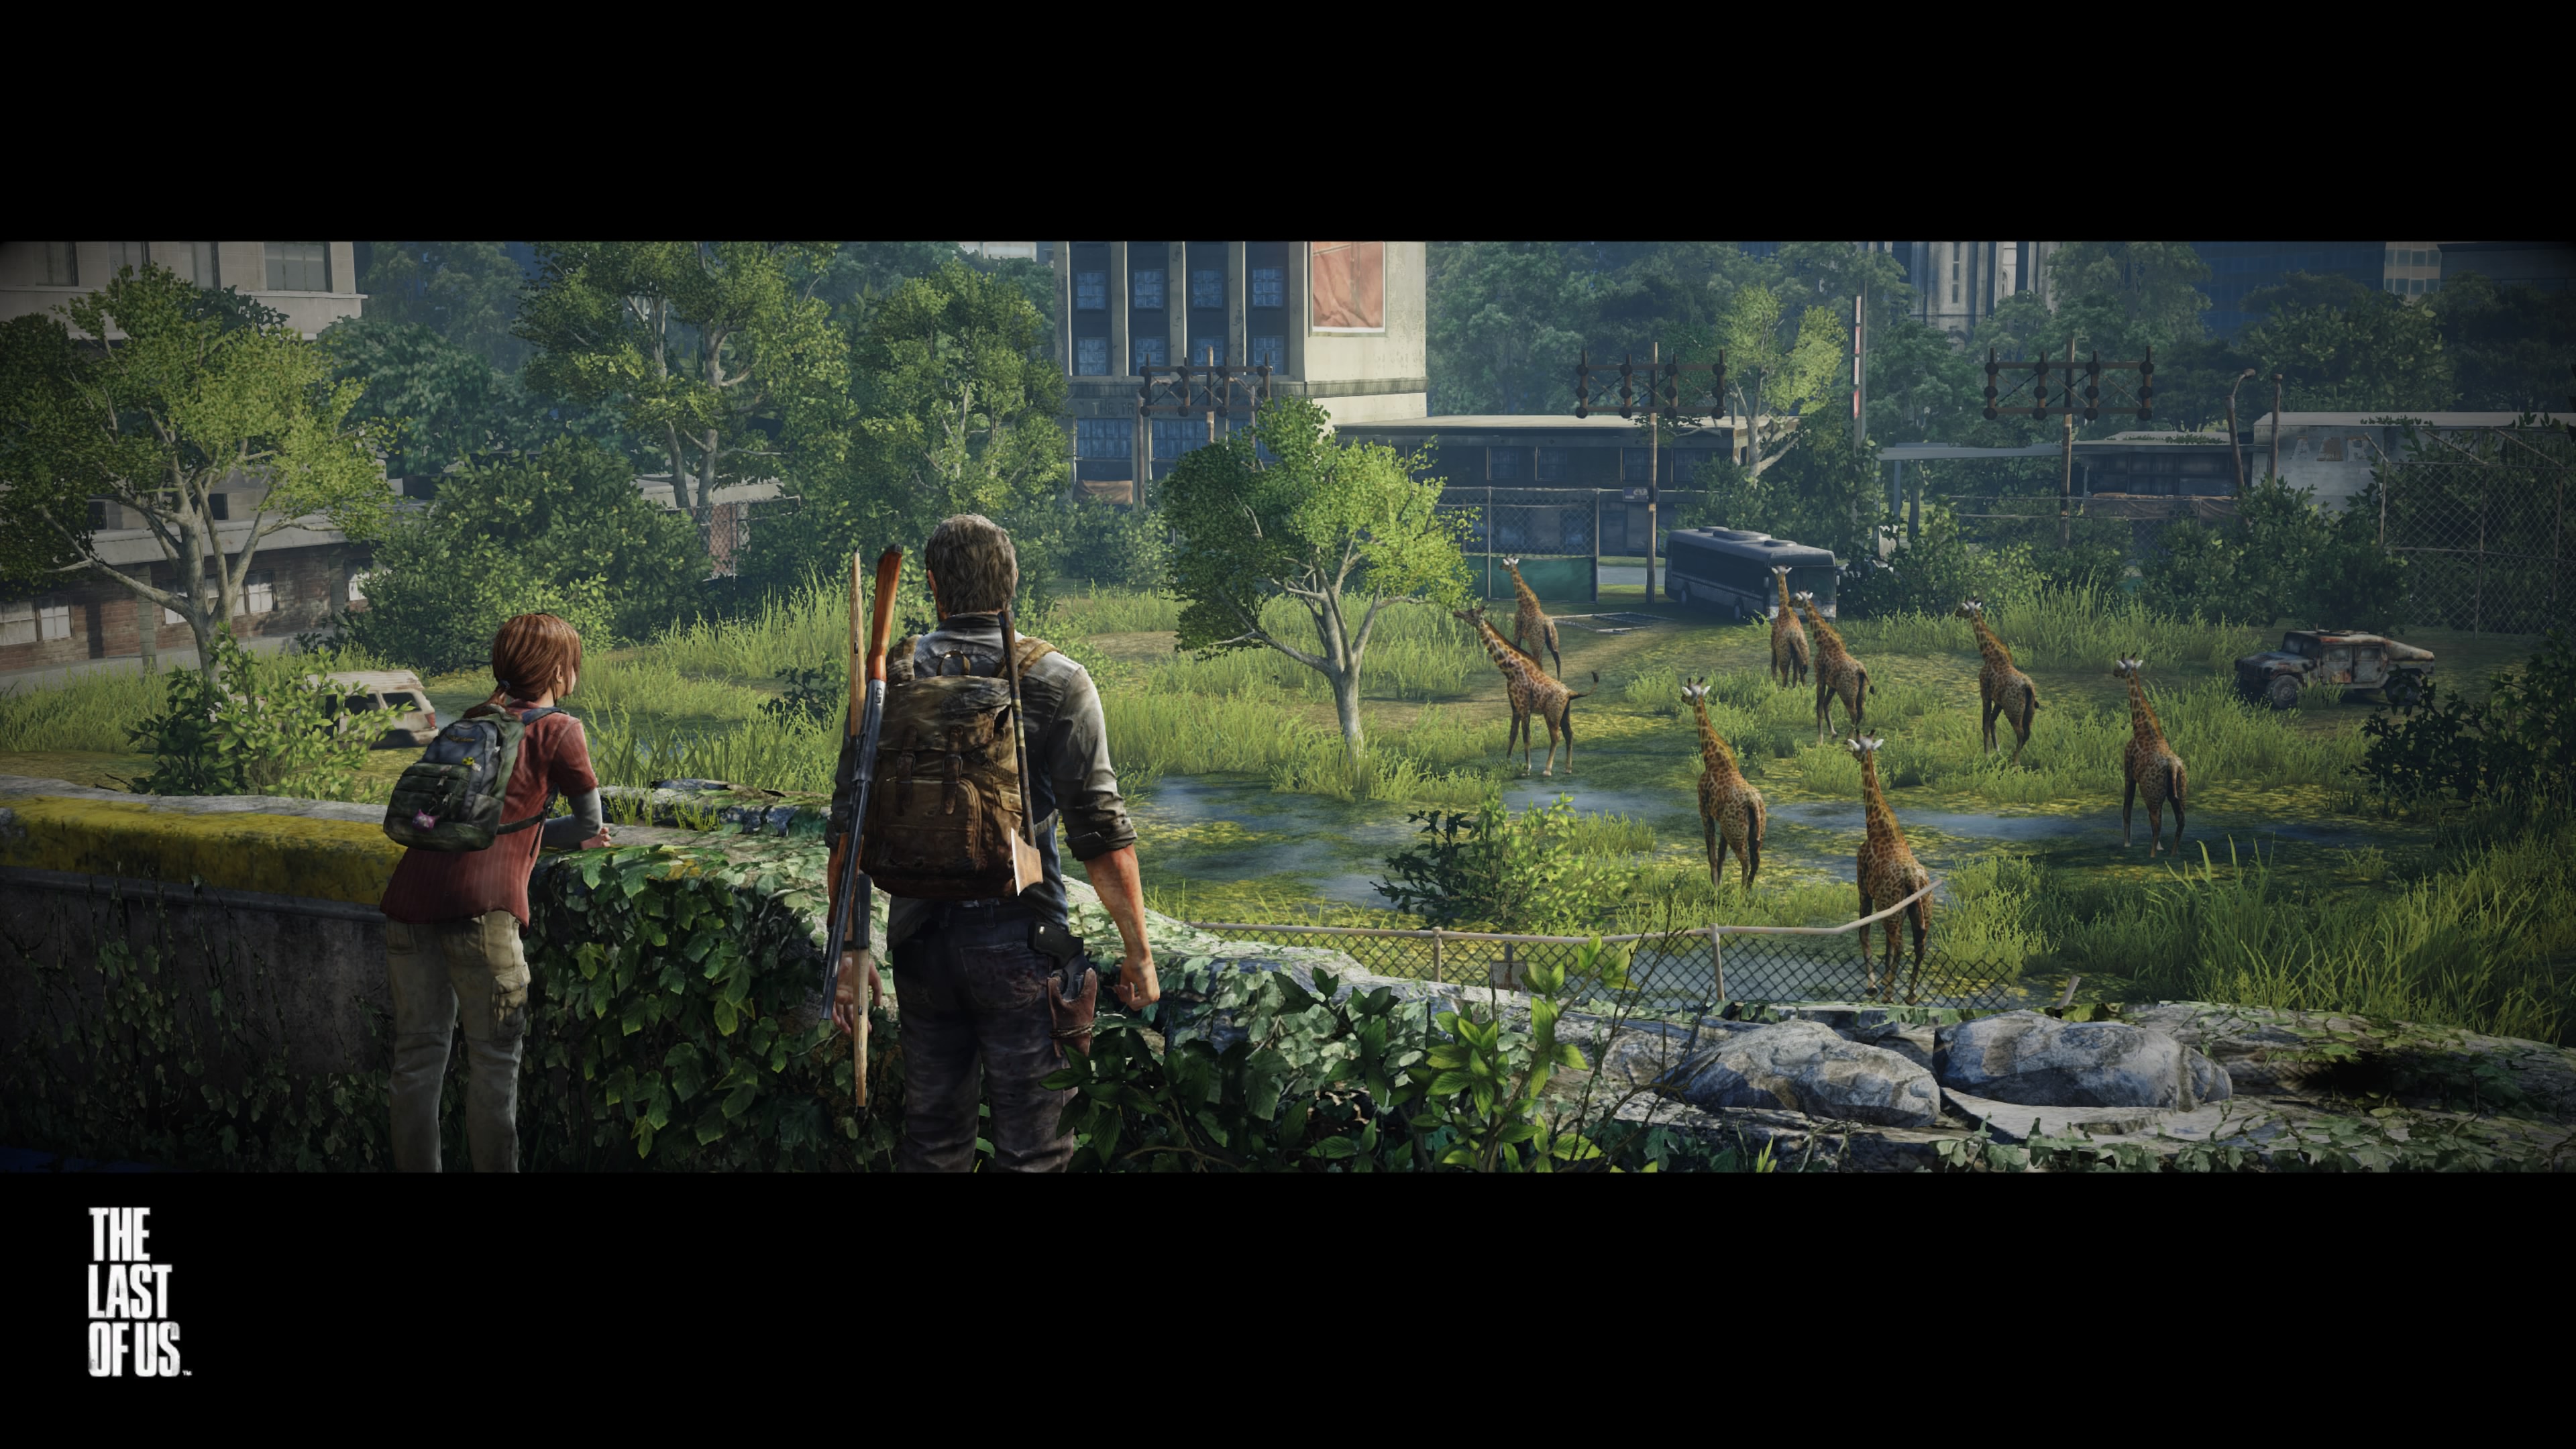 General 3840x2160 The Last of Us Ellie Williams Joel Miller apocalyptic video games screen shot ruins video game characters city overgrown nature